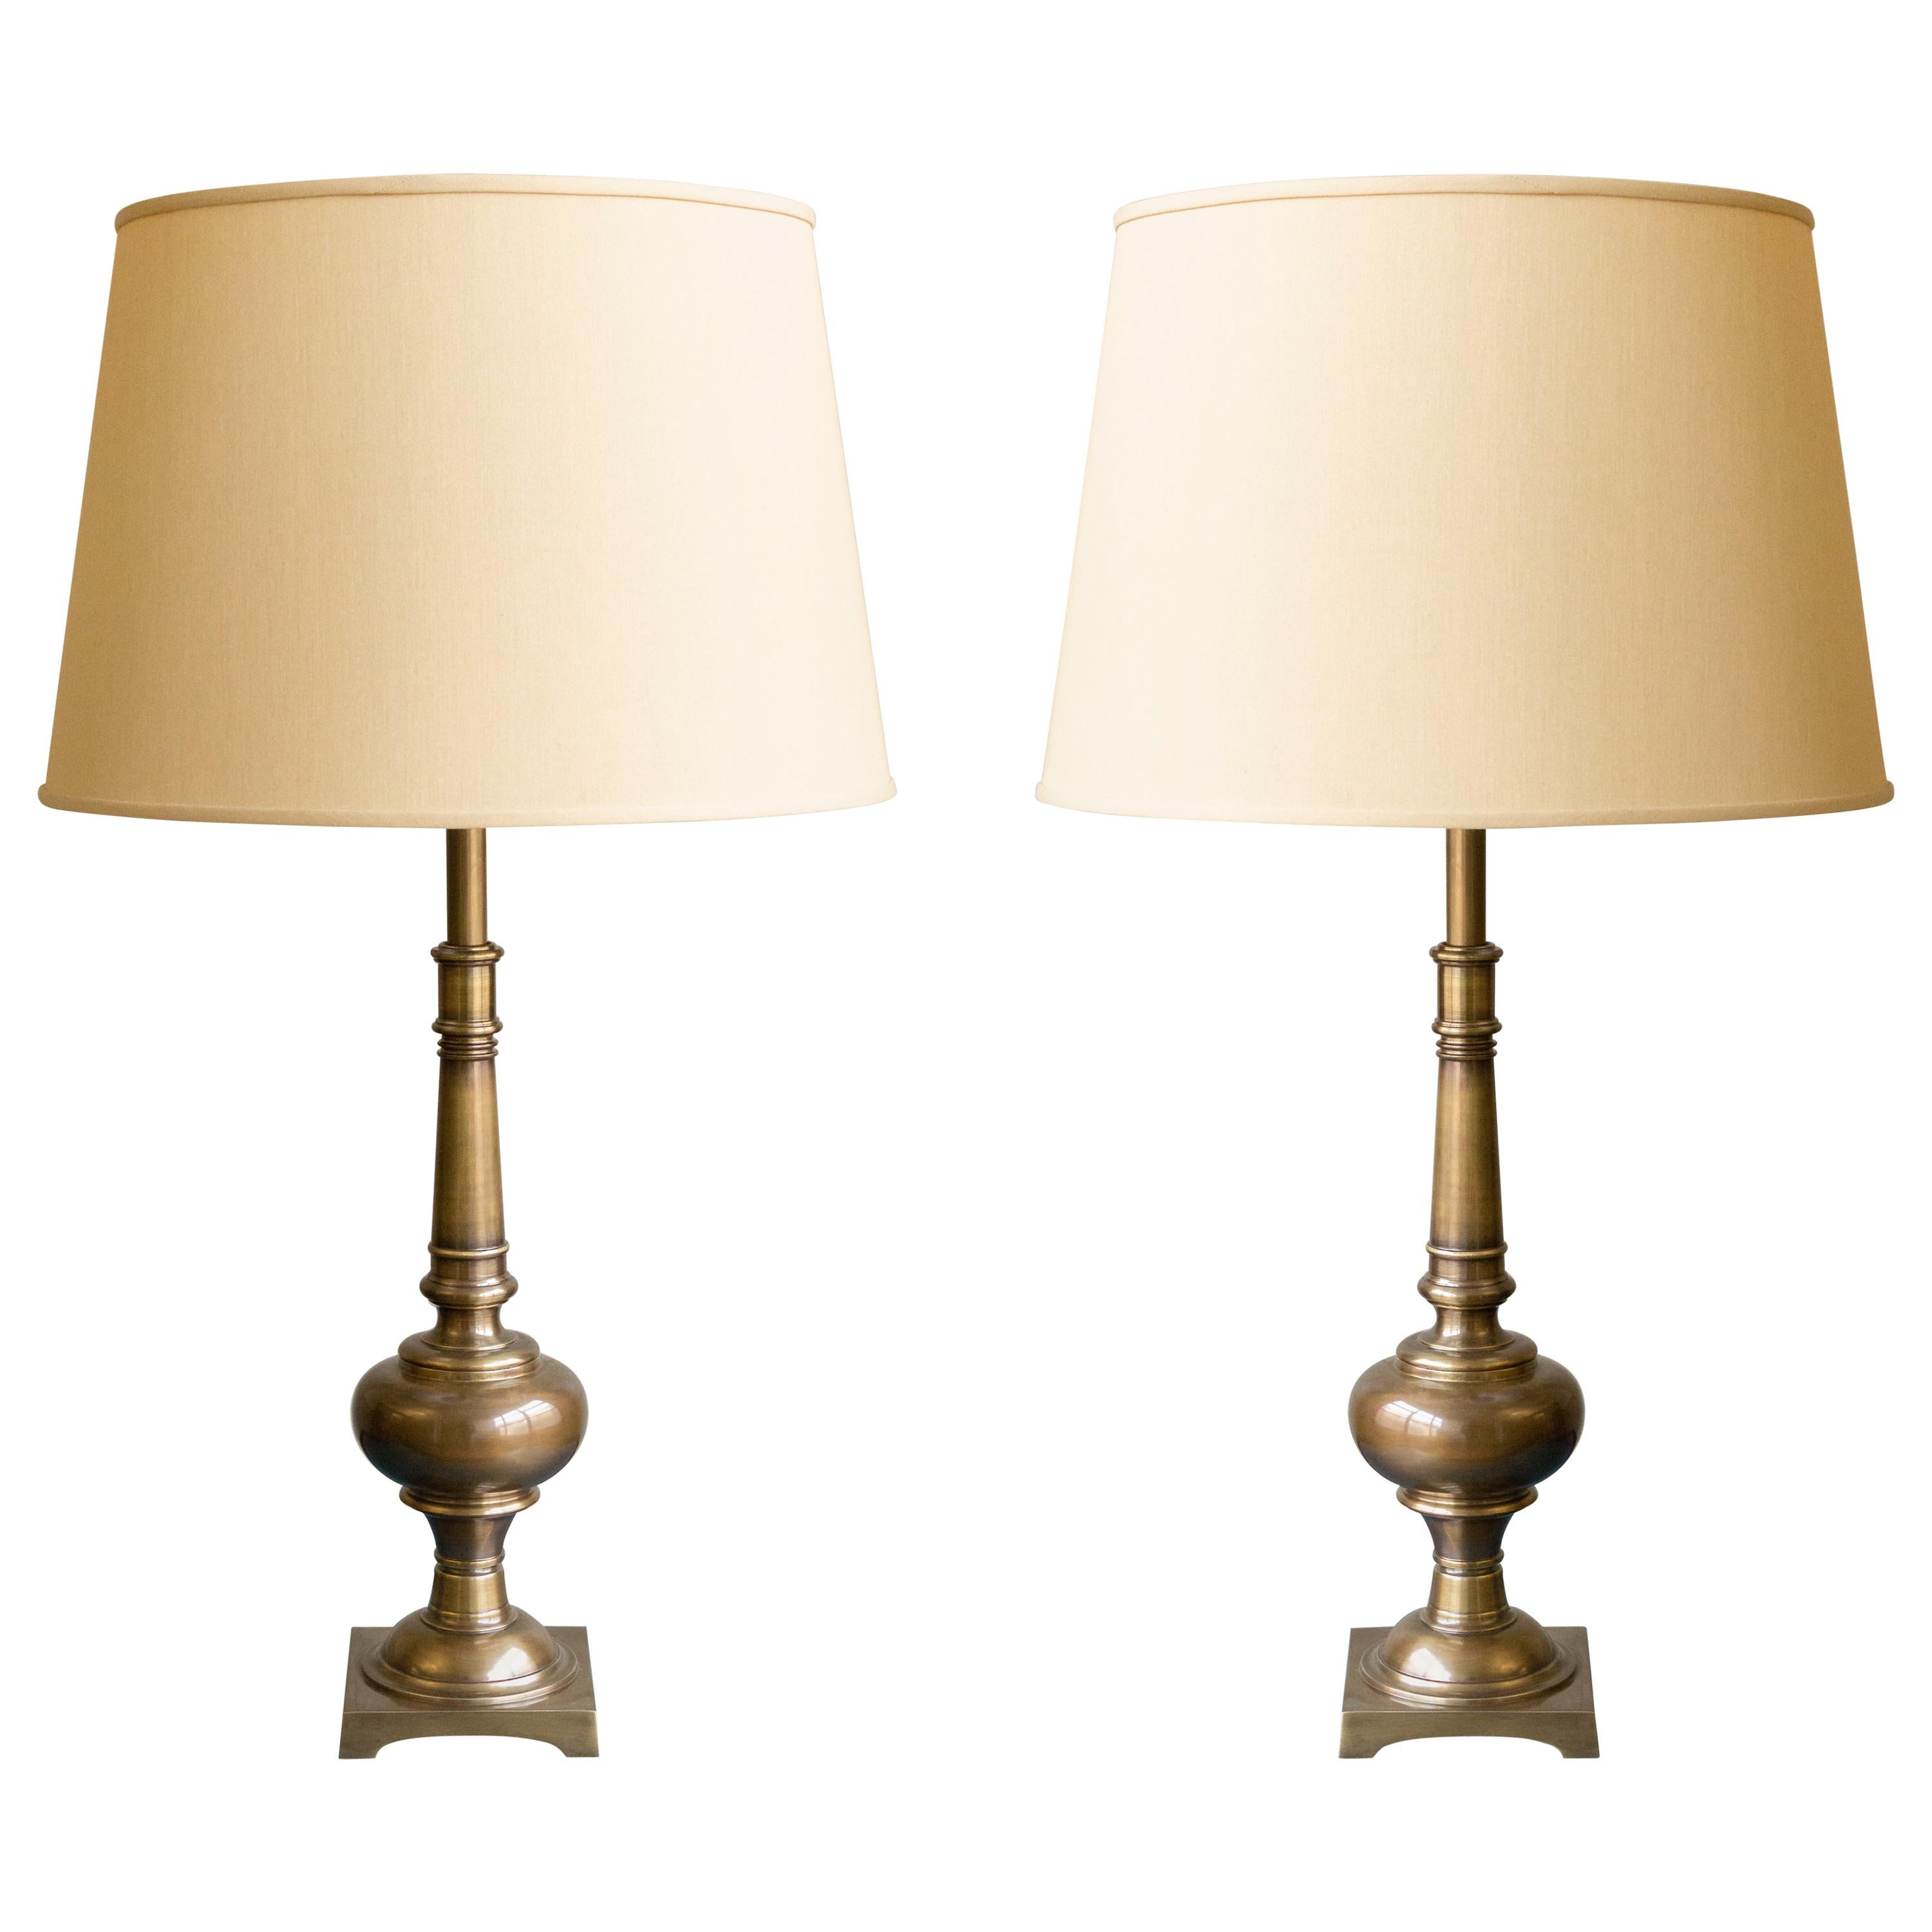 Pair of 1940s Bronze Plated Table Lamps